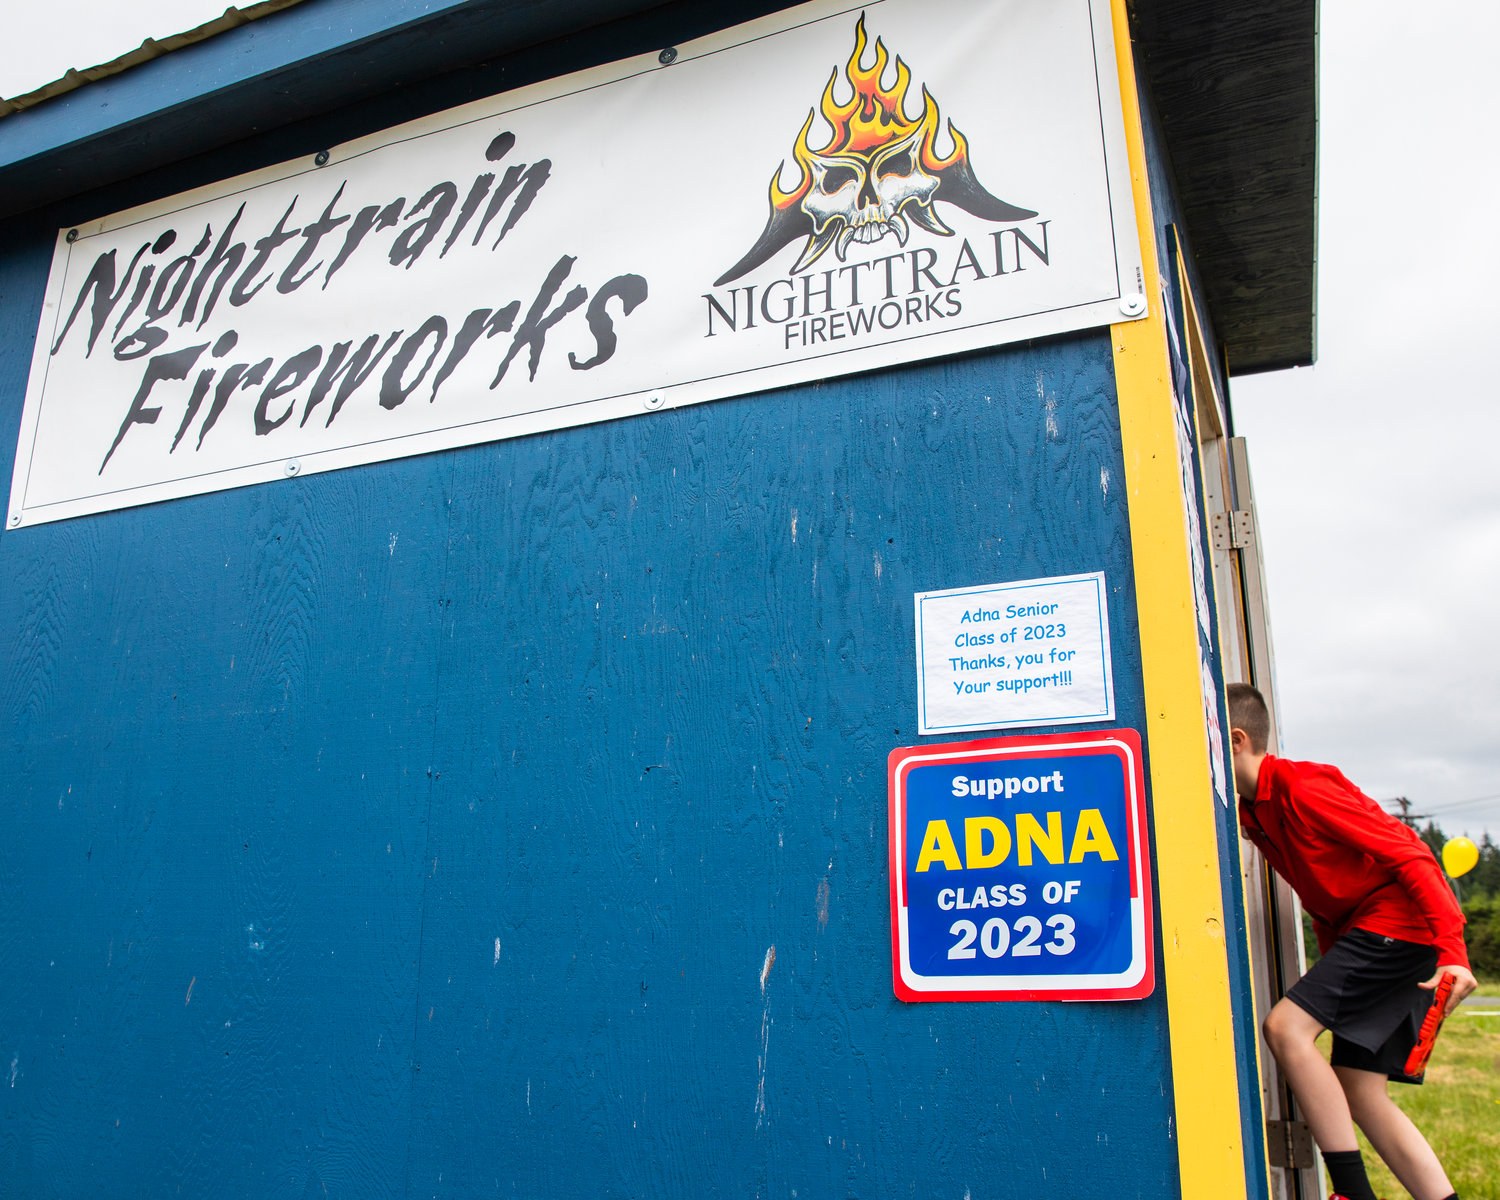 Proceeds from the Nightrain Fireworks stand, located at the 76 Gas Station off Highway 603 in Adna, support the Adna High School Class of 2023.